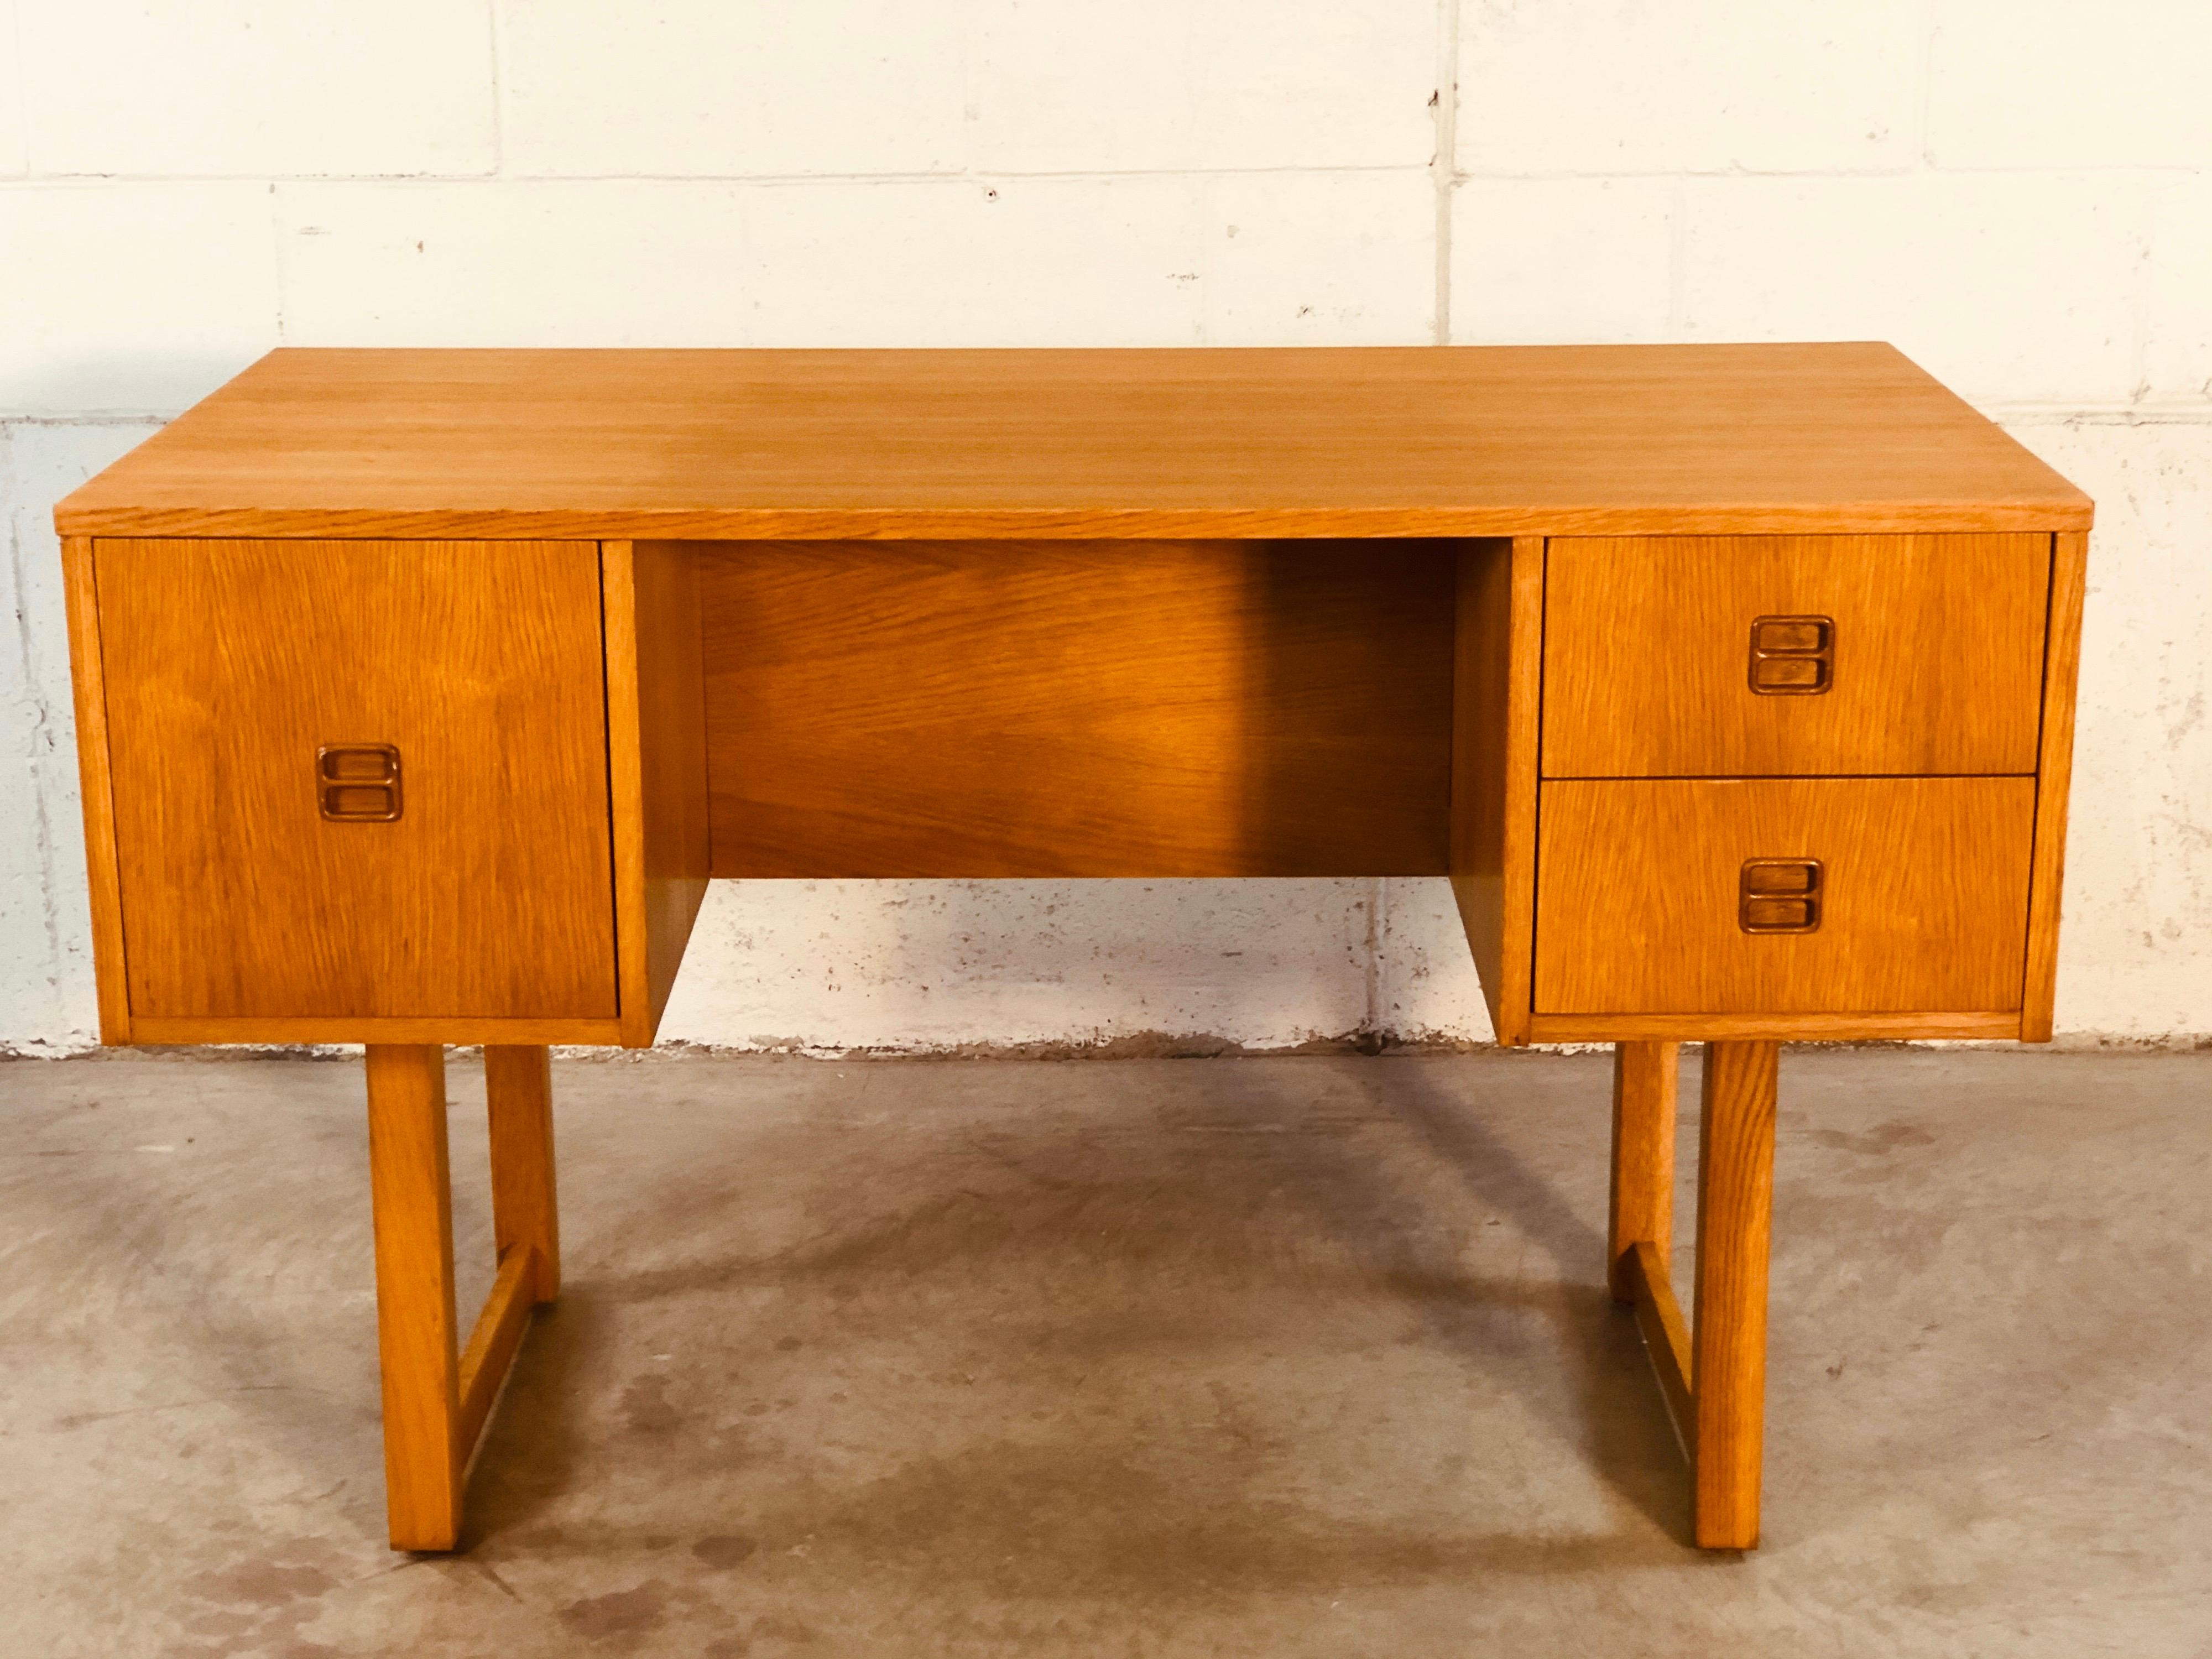 Vintage Danish style oakwood sled leg double pedestal executive desk. The desk has three drawers for storage. Newly refinished and marked Yugoslavia. Knee clearance is 21” W x 14” D x 28.5” H.